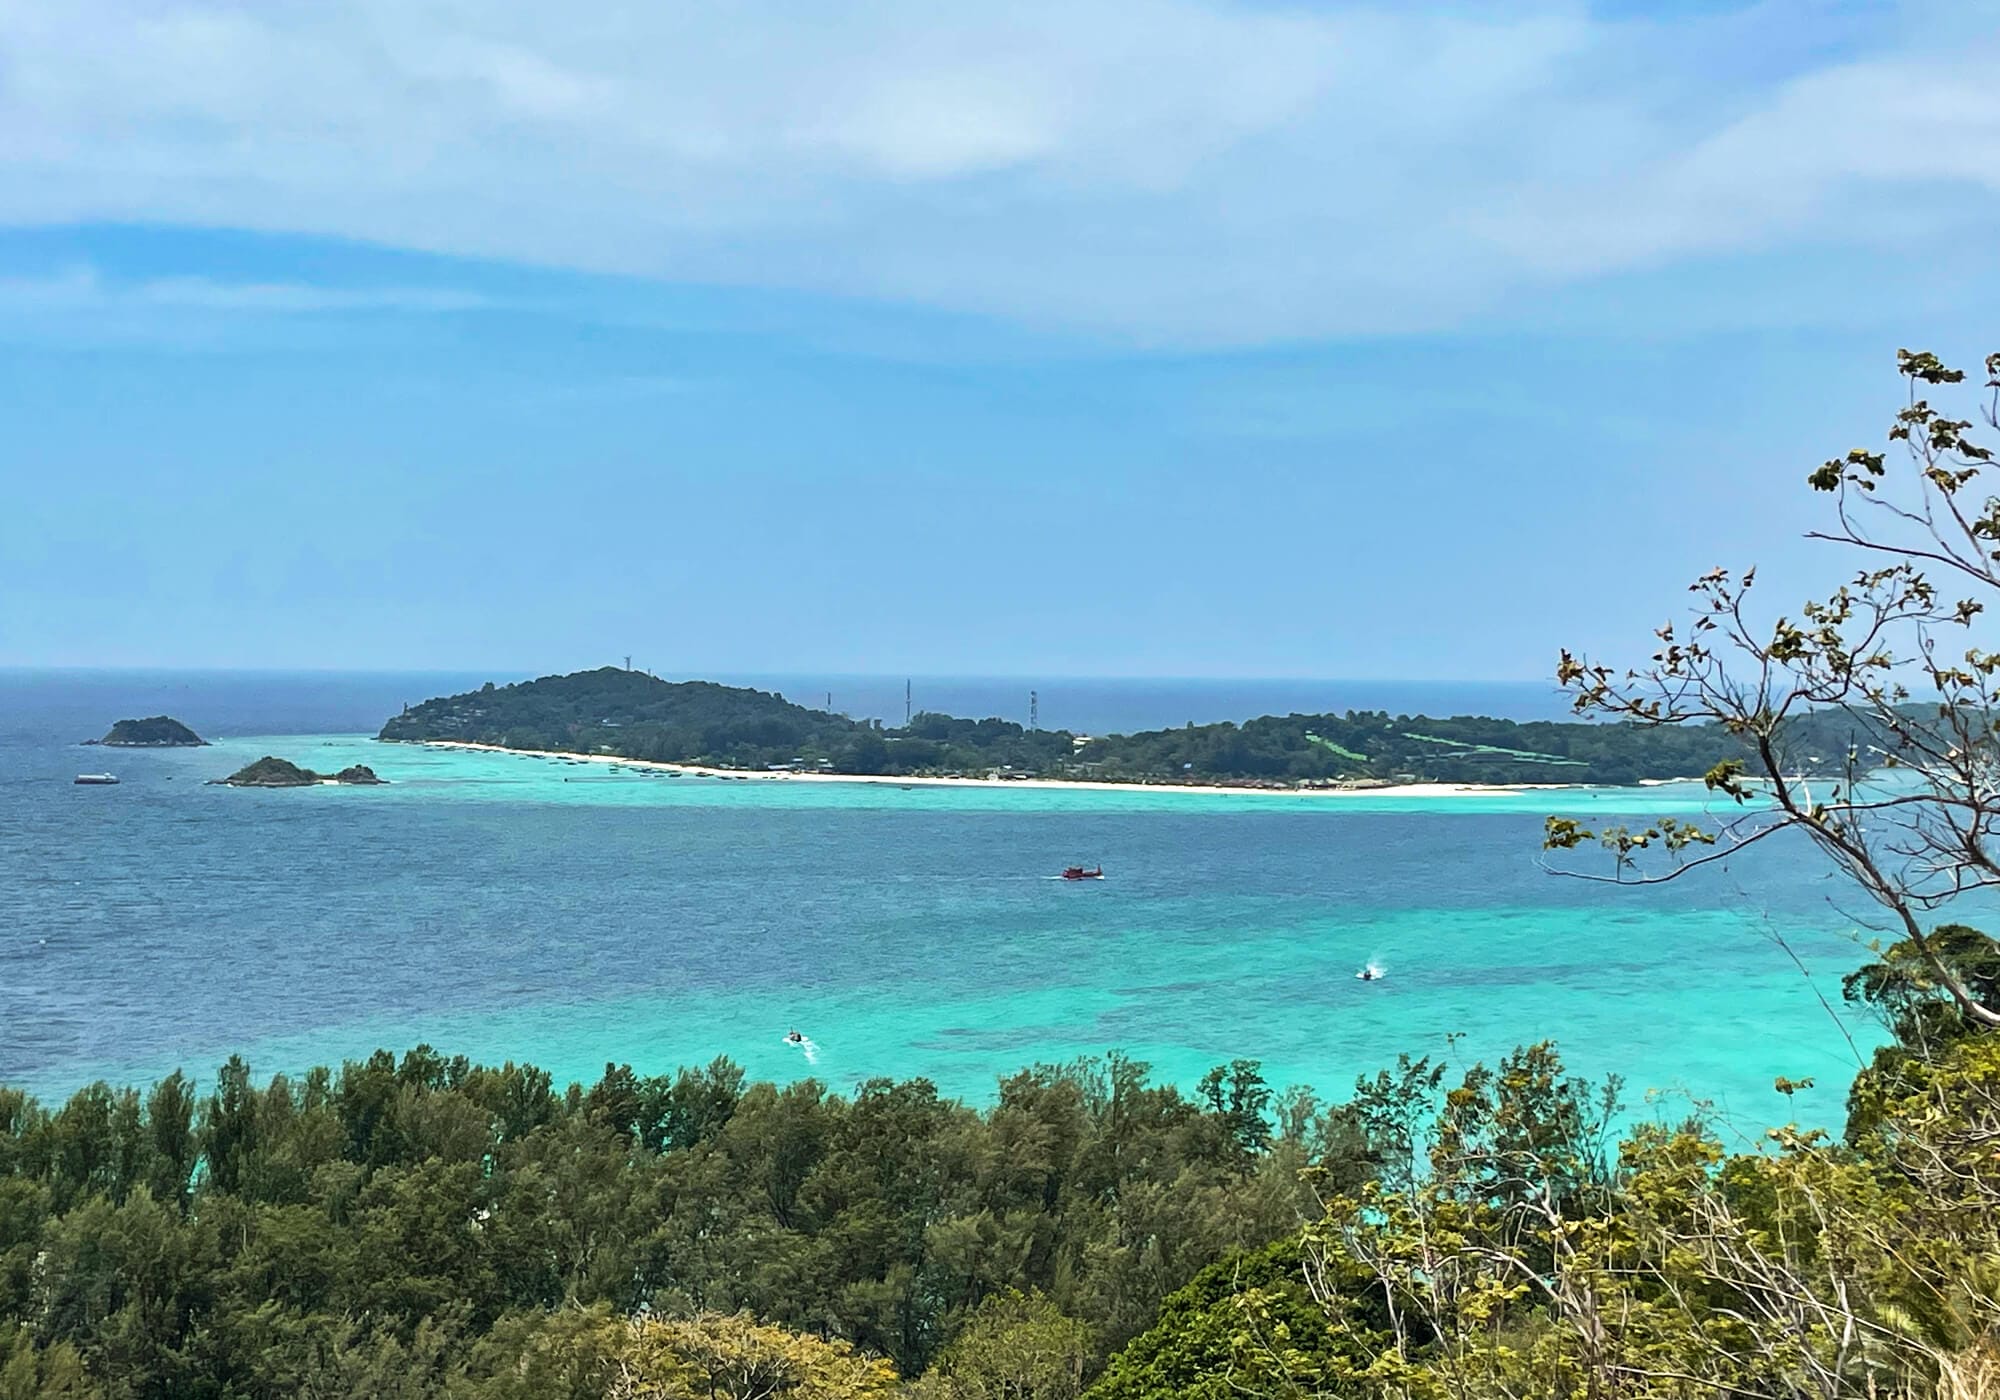 Looking out at Koh Lipe from Viewpoint One